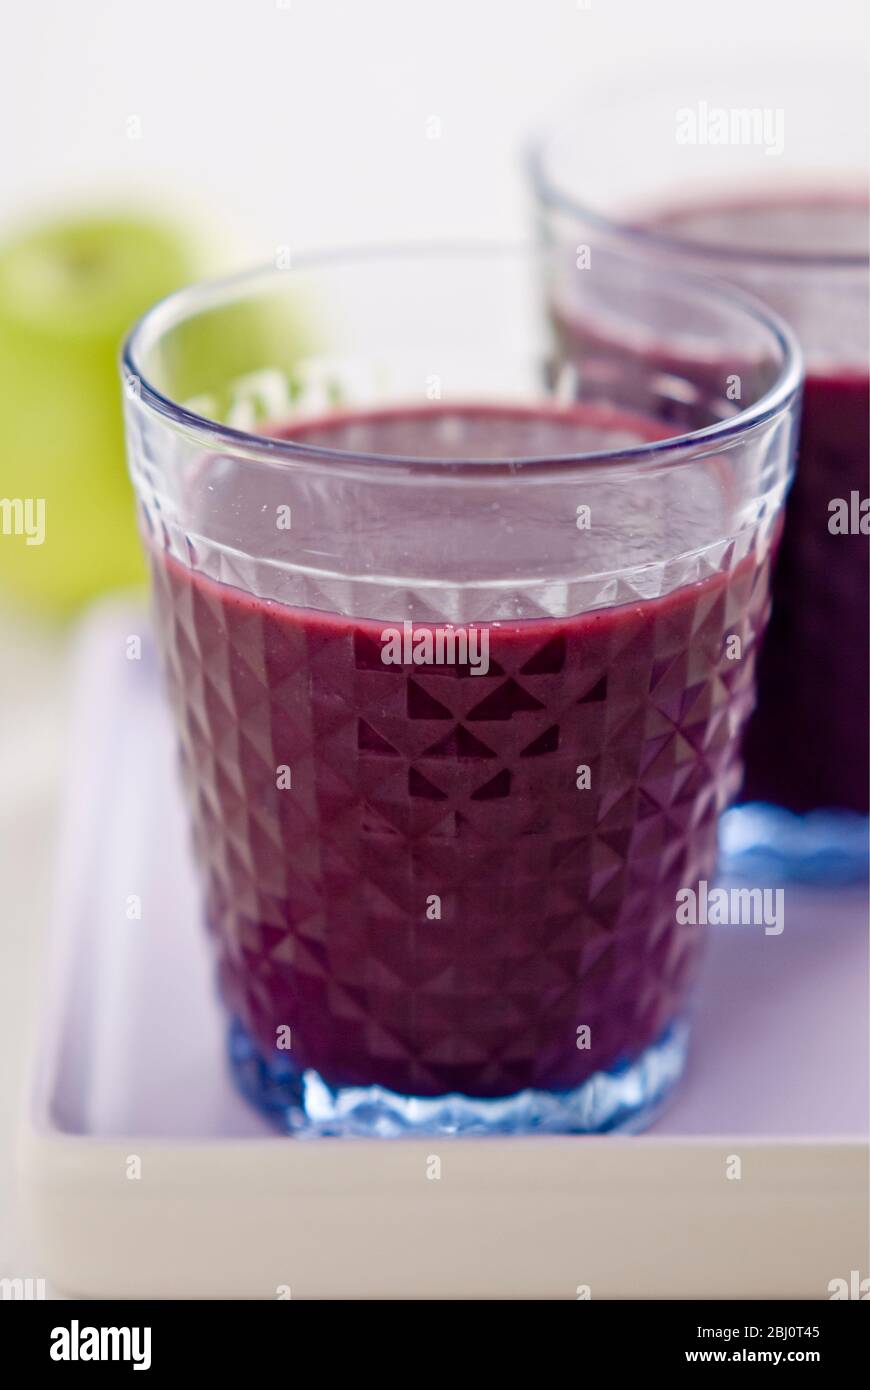 Healthy snack of freshly made blackcurrant and raspberry smoothie with fresh green apple - Stock Photo